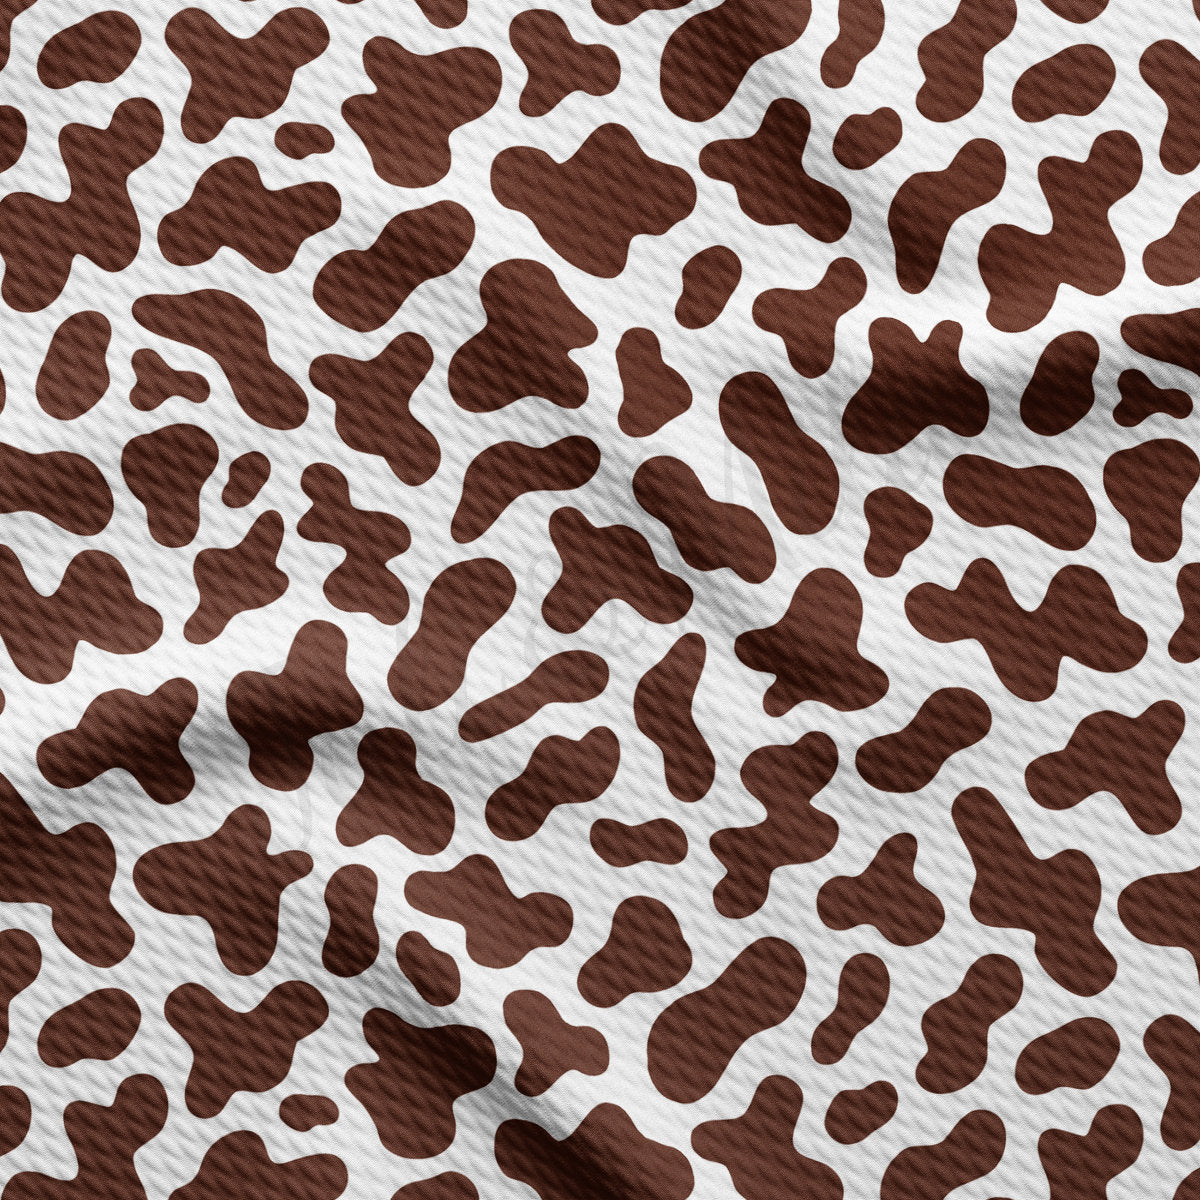 Brown Cow Spot Printed Liverpool Bullet Textured Fabric by the yard 4Way Stretch Solid Strip Thick Knit Liverpool Fabric AA2171